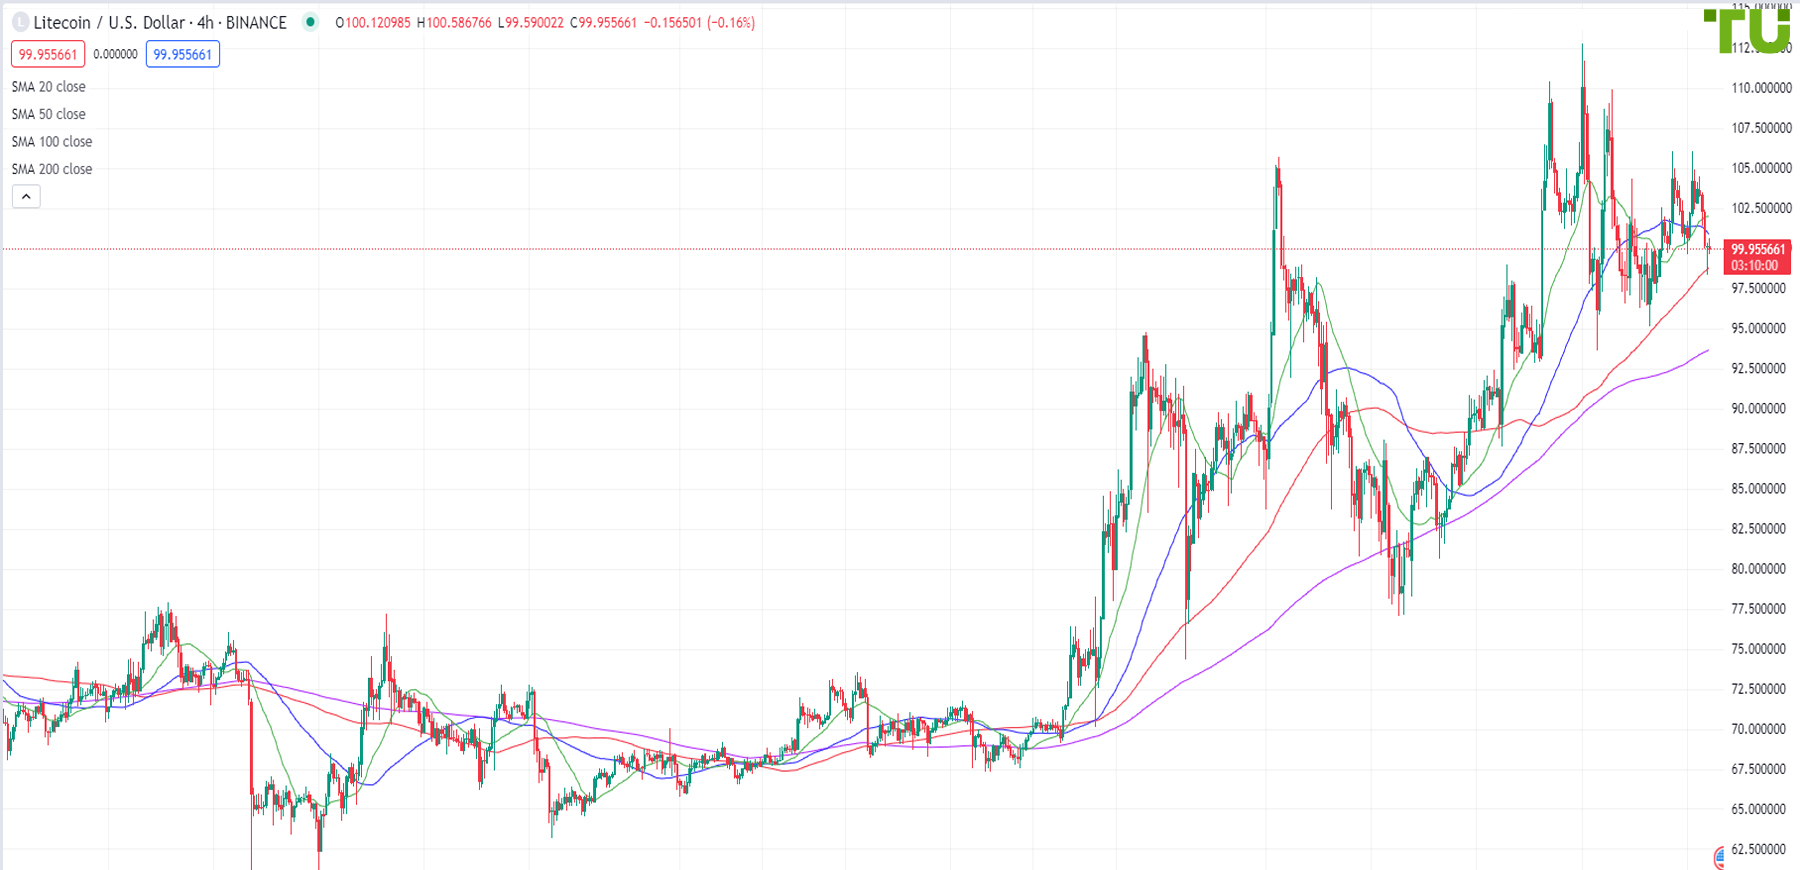 LTC/USD is unsuccessfully trying to break through the resistance at 106.00